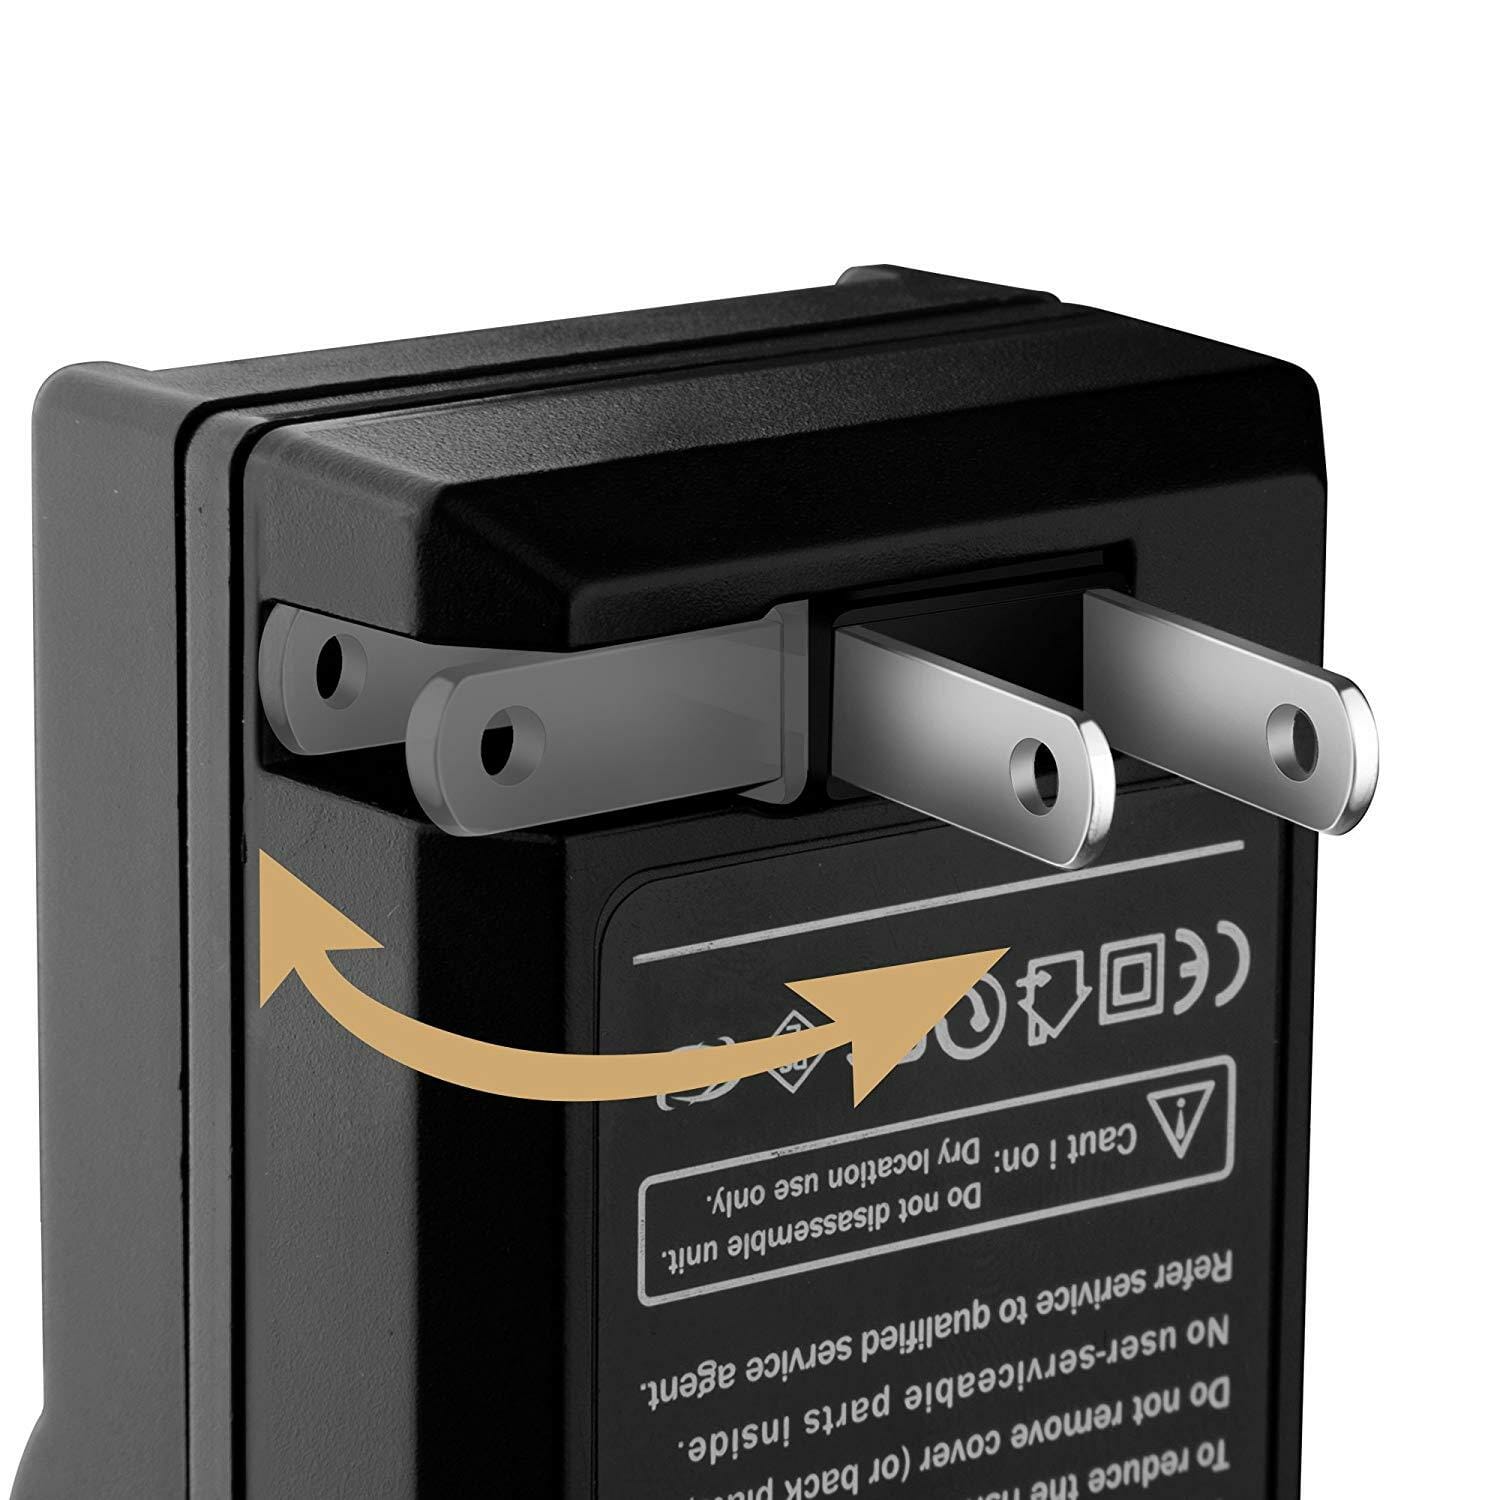 GVM NPF 750 Li-ion Replacement Batteries and Chargers - GVMLED